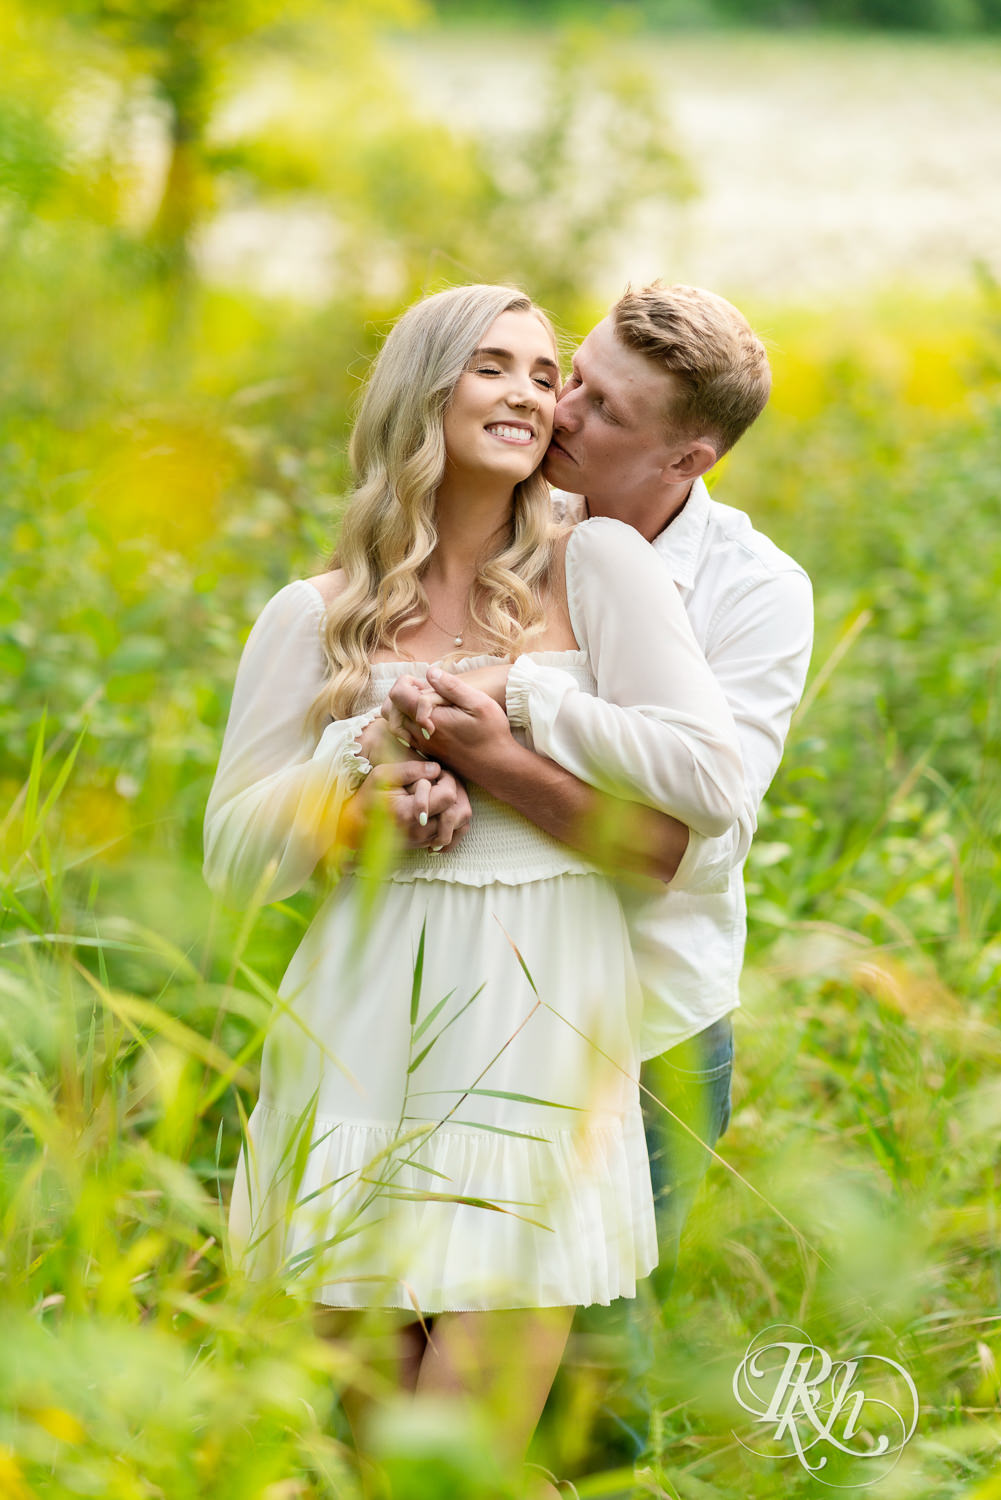 Man and woman in white and cowboy boots kiss during open field engagement photos at Lebanon Hills Regional Park in Eagan, Minnesota.